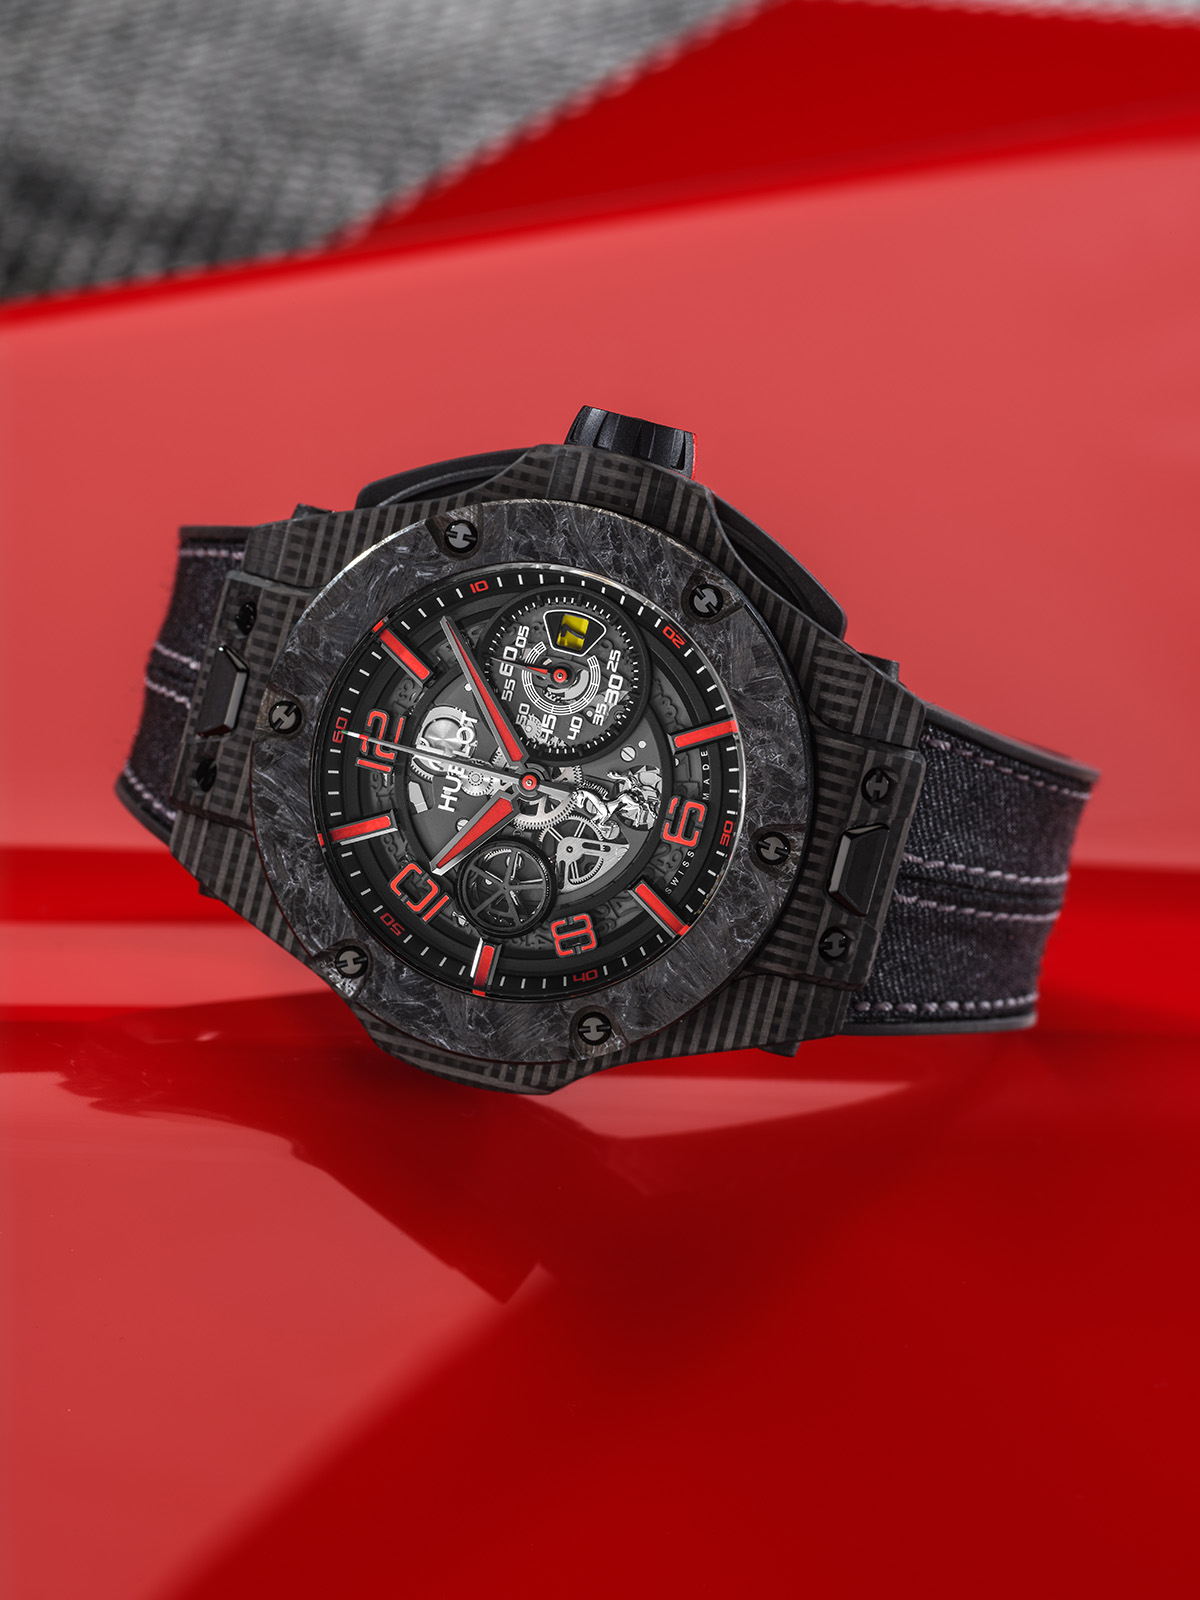 Black watch pictured on a red background